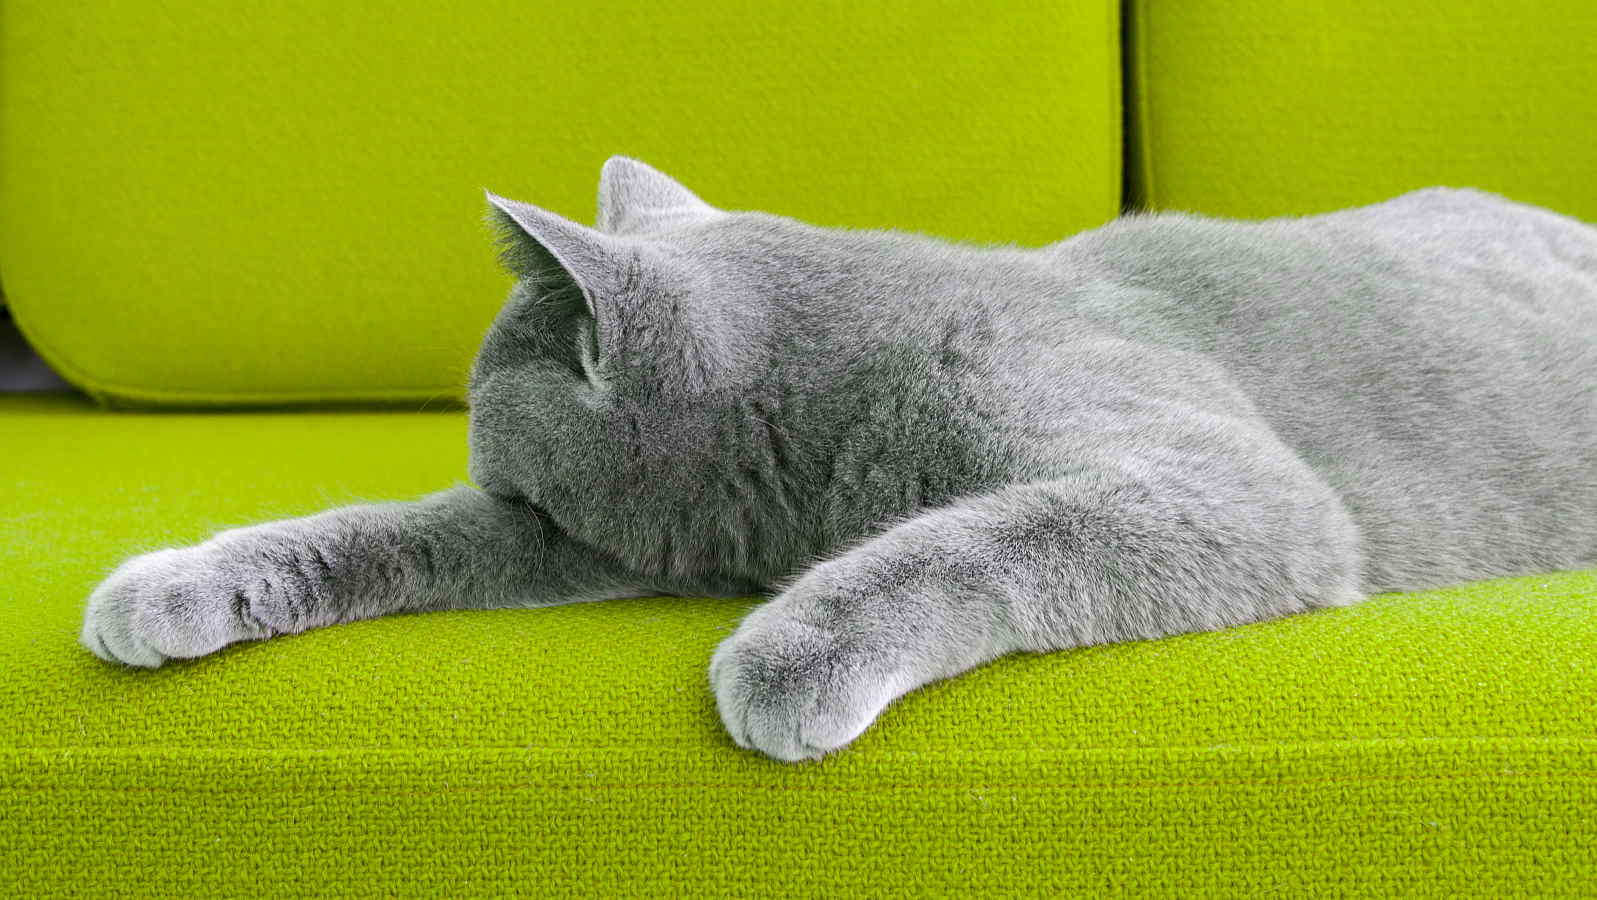 Cat and cat dander on a green couch